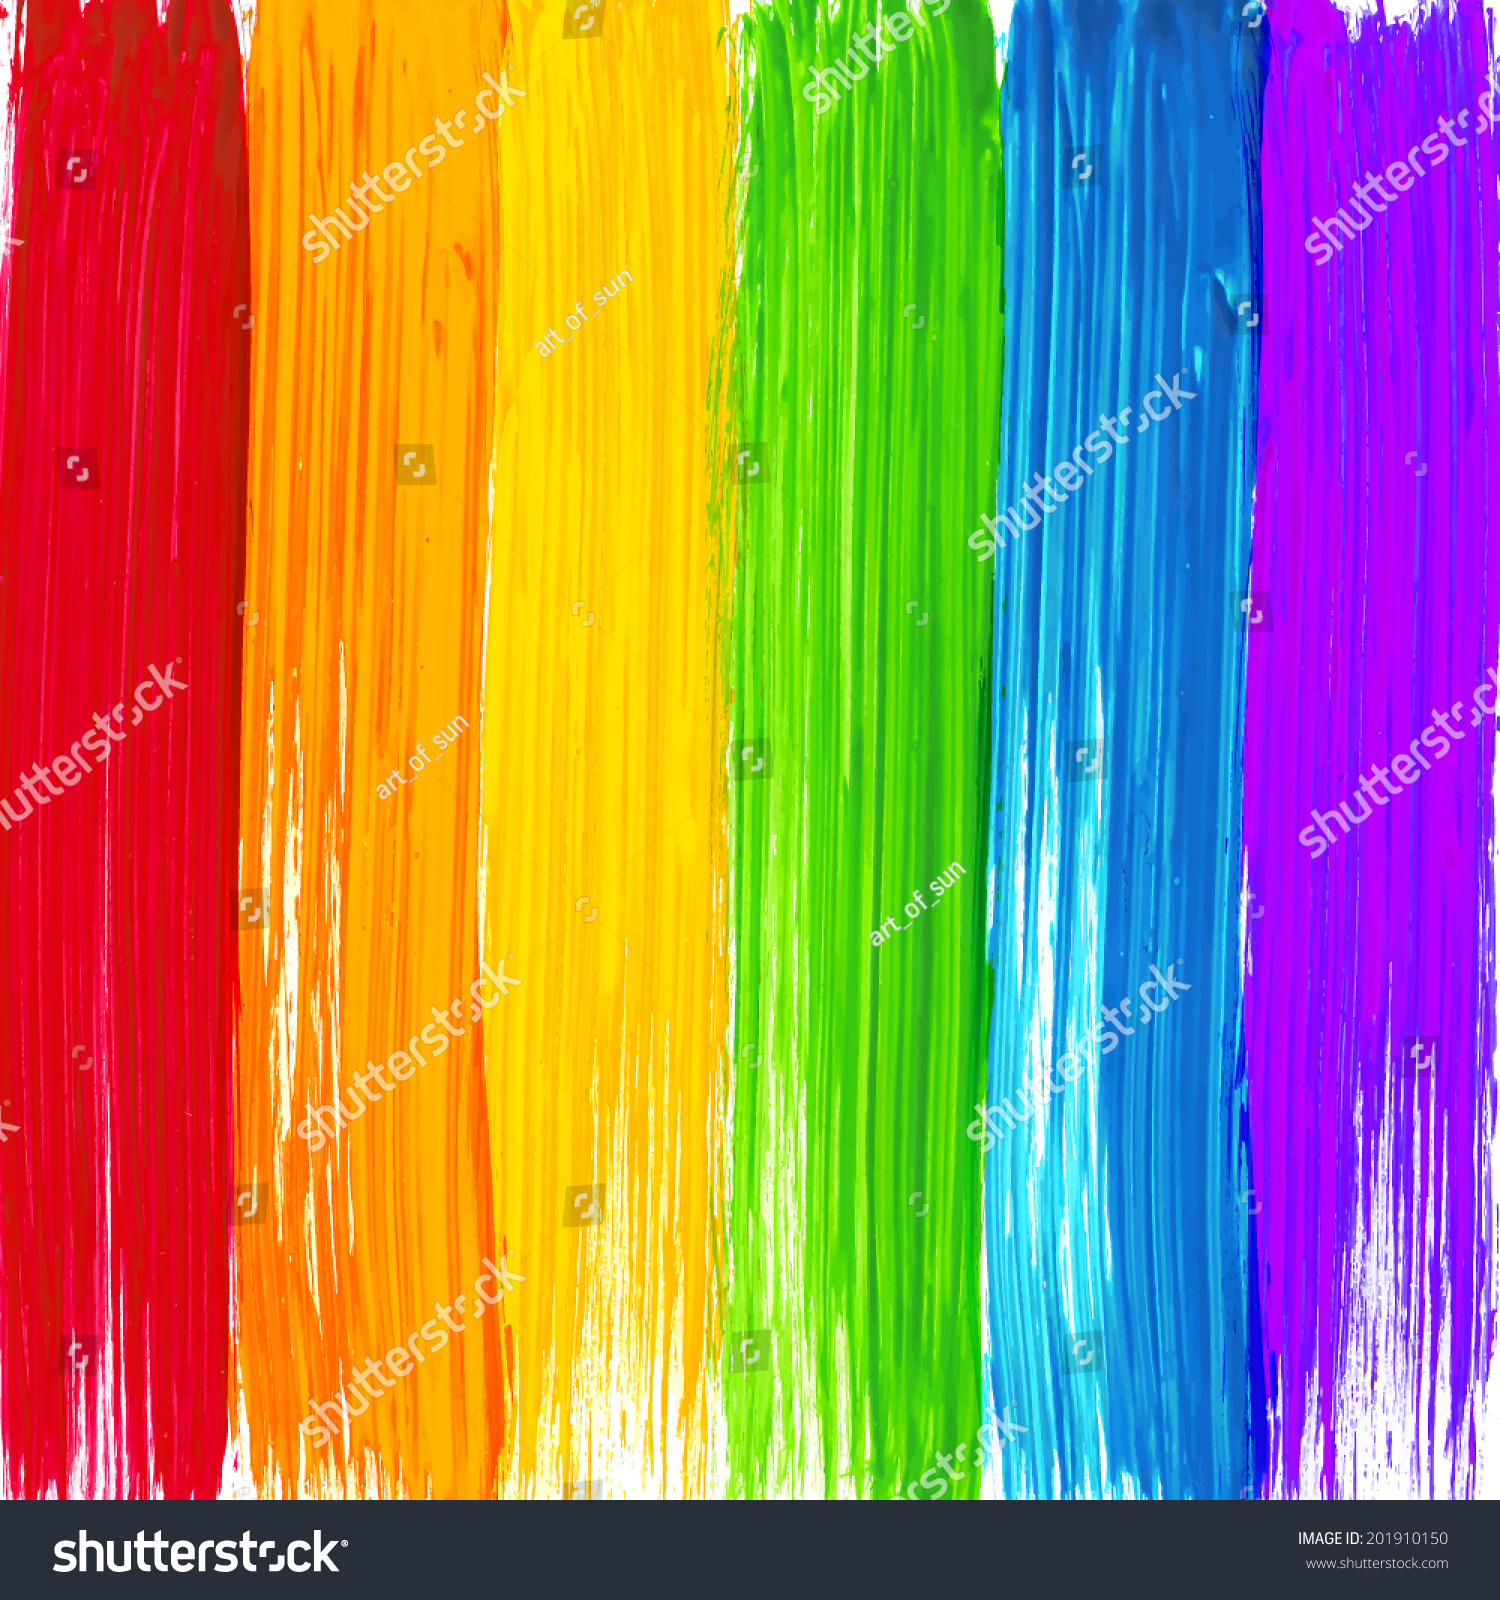 Download Bright Rainbow Paint Strokes Vector Background Stock ...